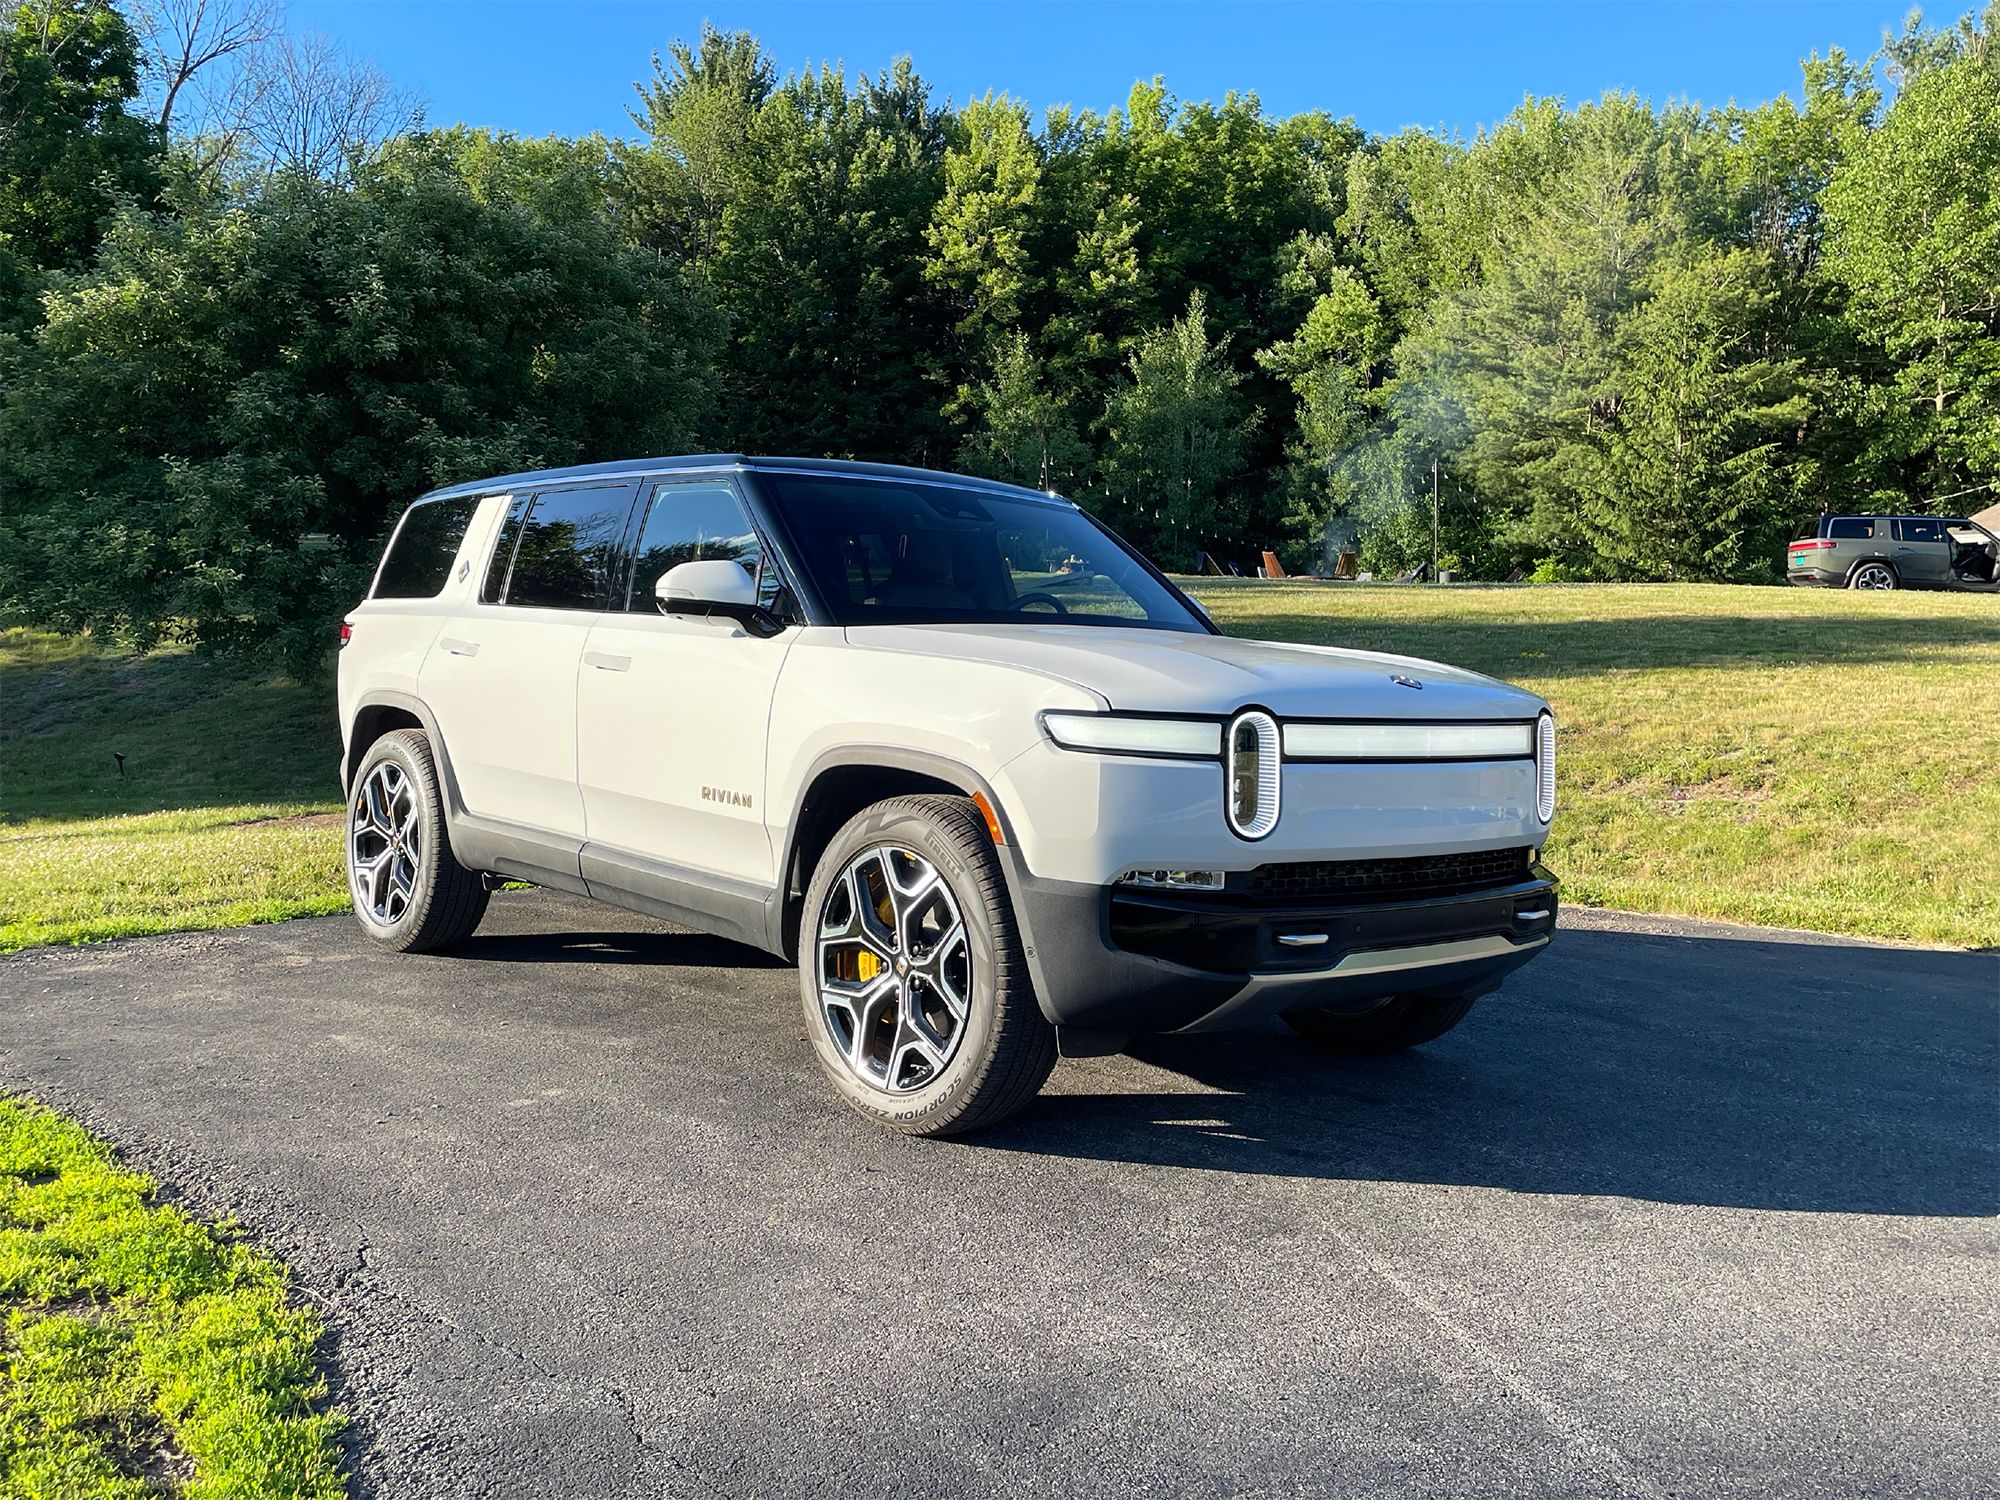 Get the Inside Scoop on Rivian's Production Goals and Challenges - Take Our Poll Today!